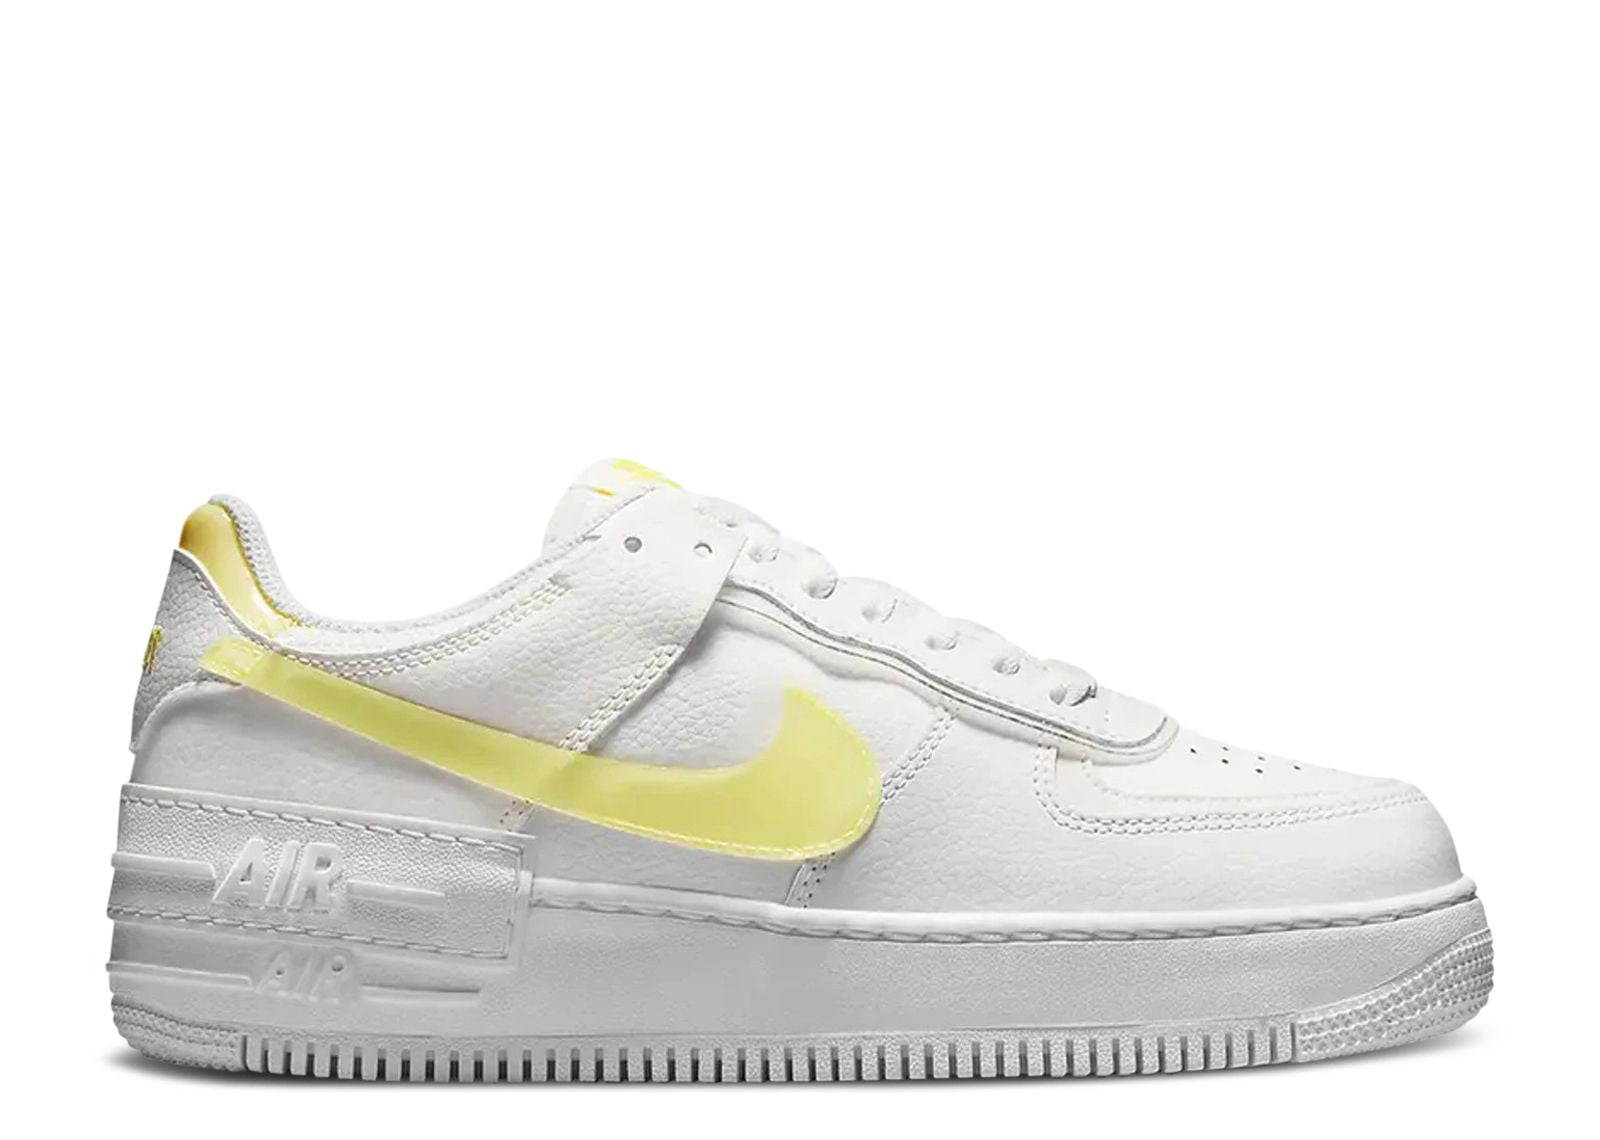 Second Chance - Nike basket running nike shoes Shadow White Opti Yellow - 40 | NEW